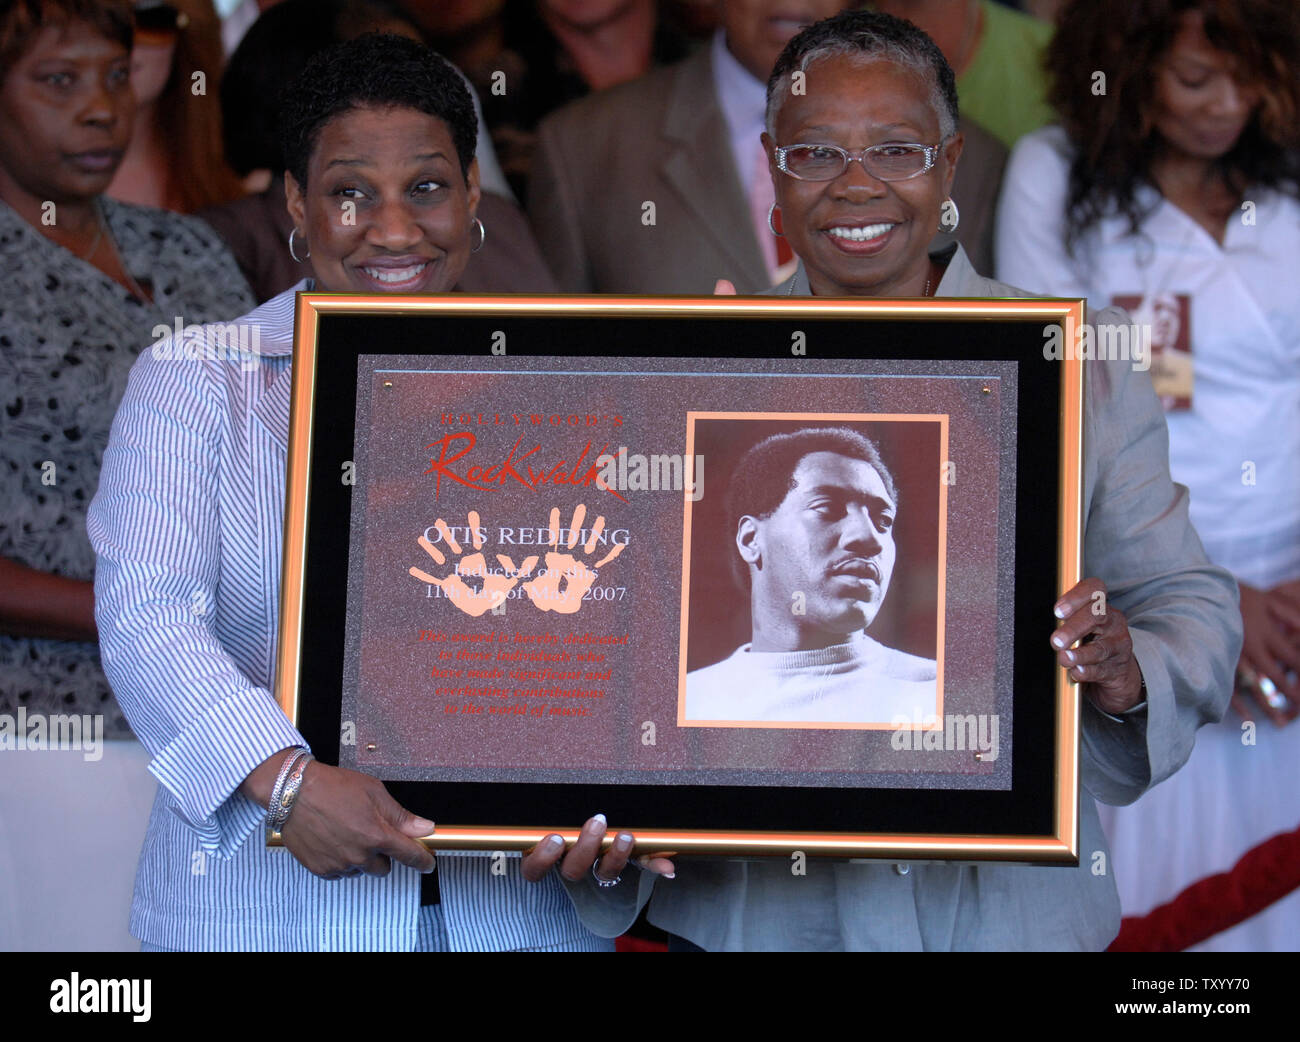 Otis Redding's wife Zelma Atwood (R) and daughter Carla Redding-Andrews (L) attend a ceremony where the late Otis Redding, The Mamas and the Papas, and Al Kooper are inducted into Hollywood's Rockwalk  in the Hollywood section of Los Angeles on May 11, 2007. (UPI Photo/ Phil McCarten) Stock Photo